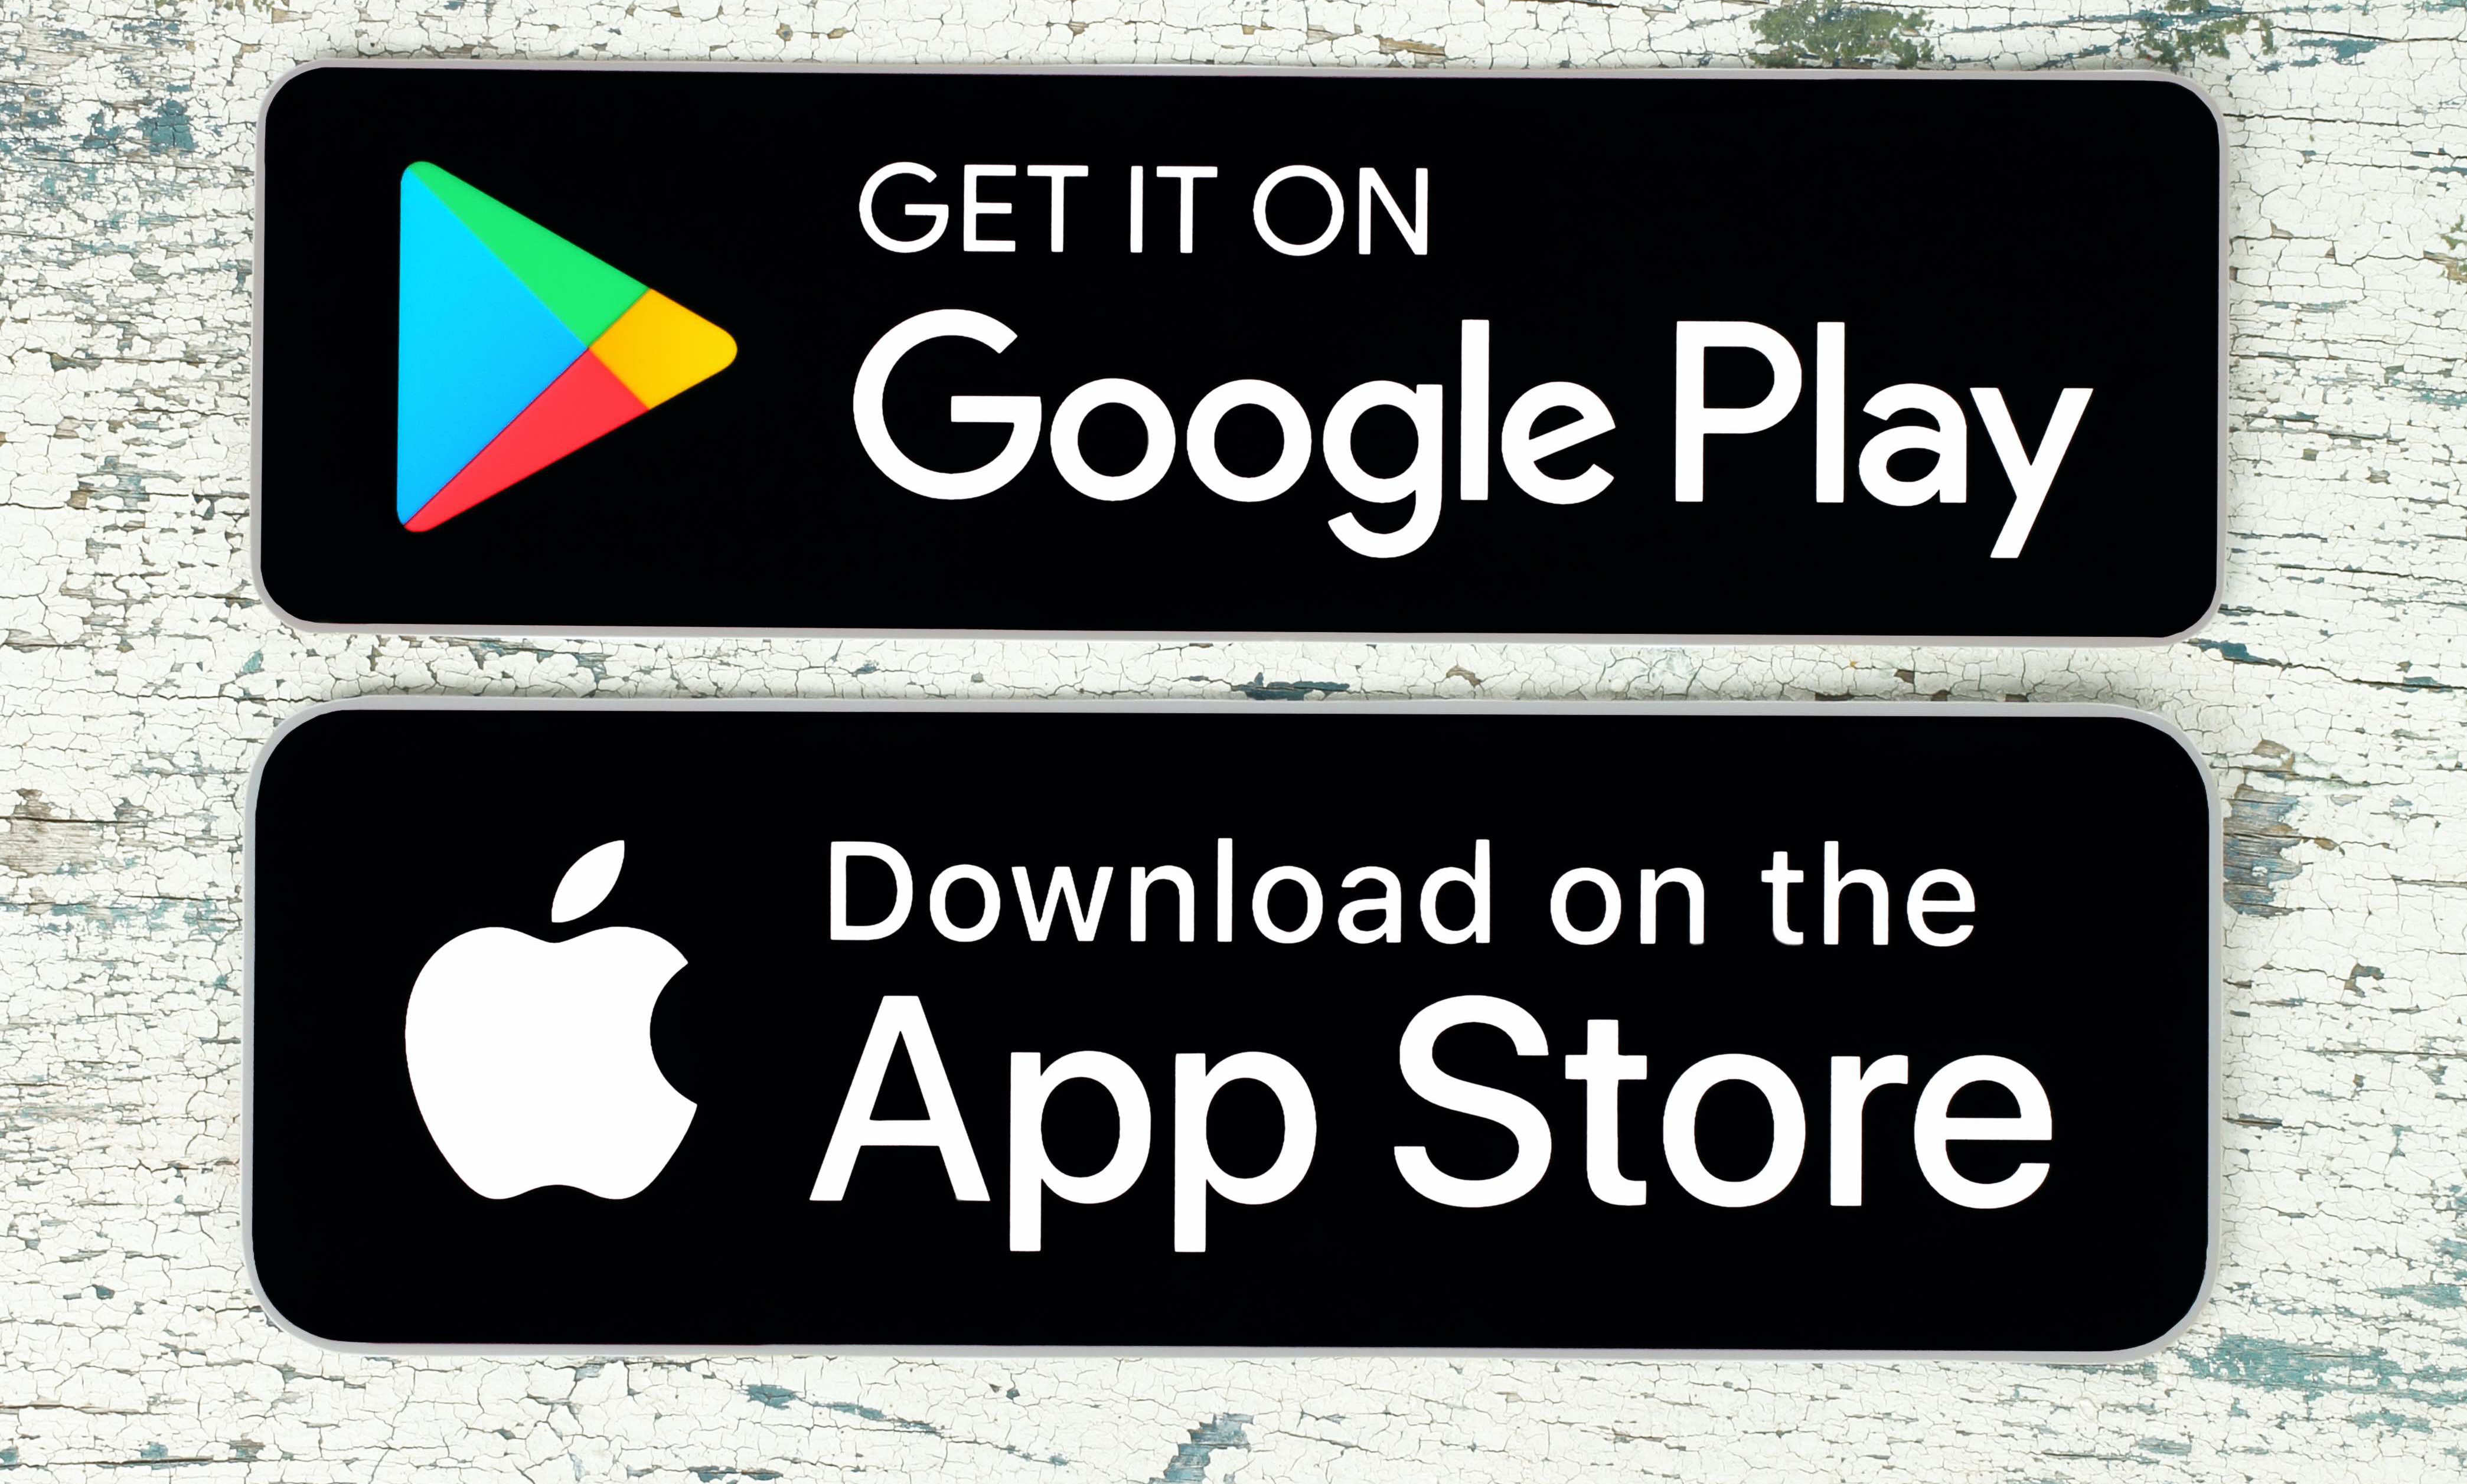 Do I need Google Play Store to download apps?